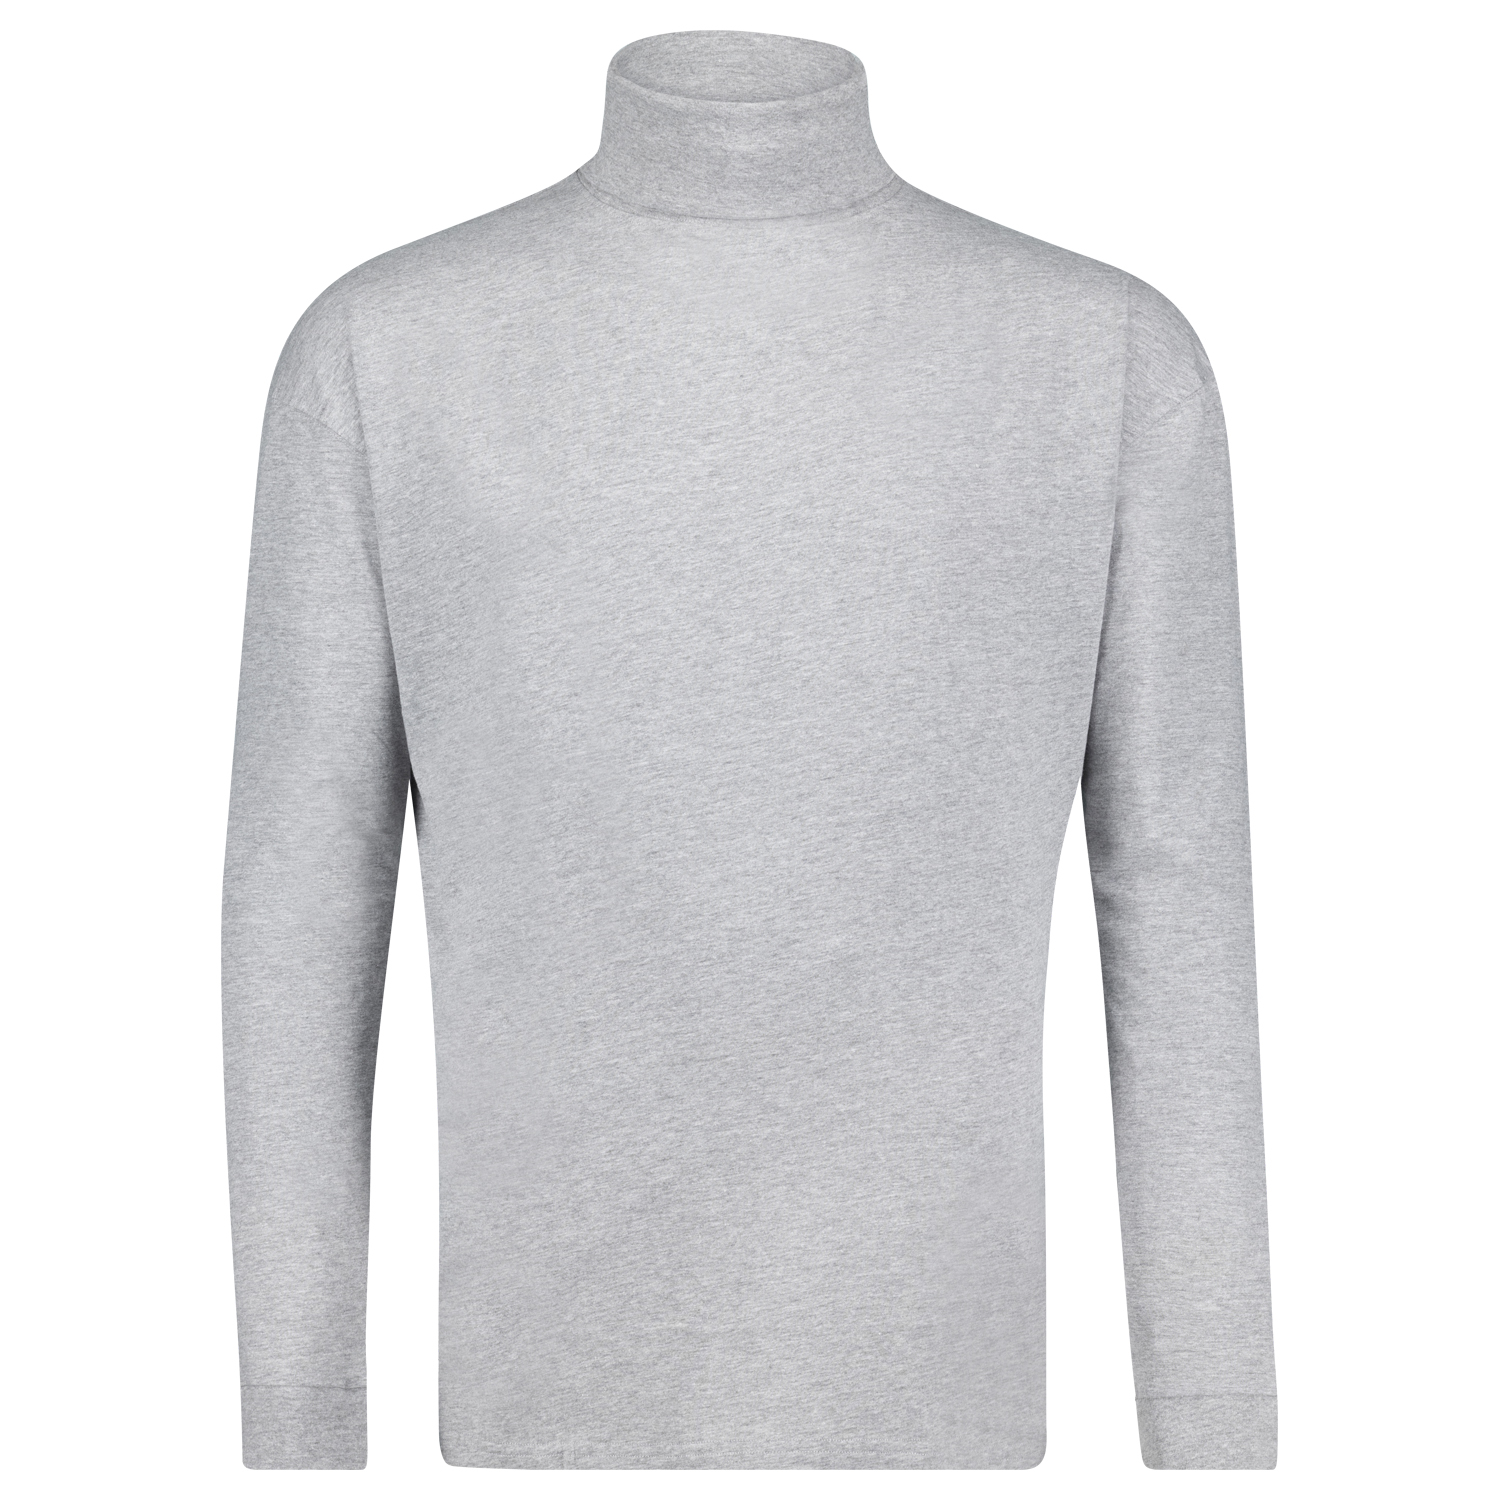 Longsleeve for men COMFORT FIT with turtle neck in grey by ADAMO in size 2XL up to oversize 12XL